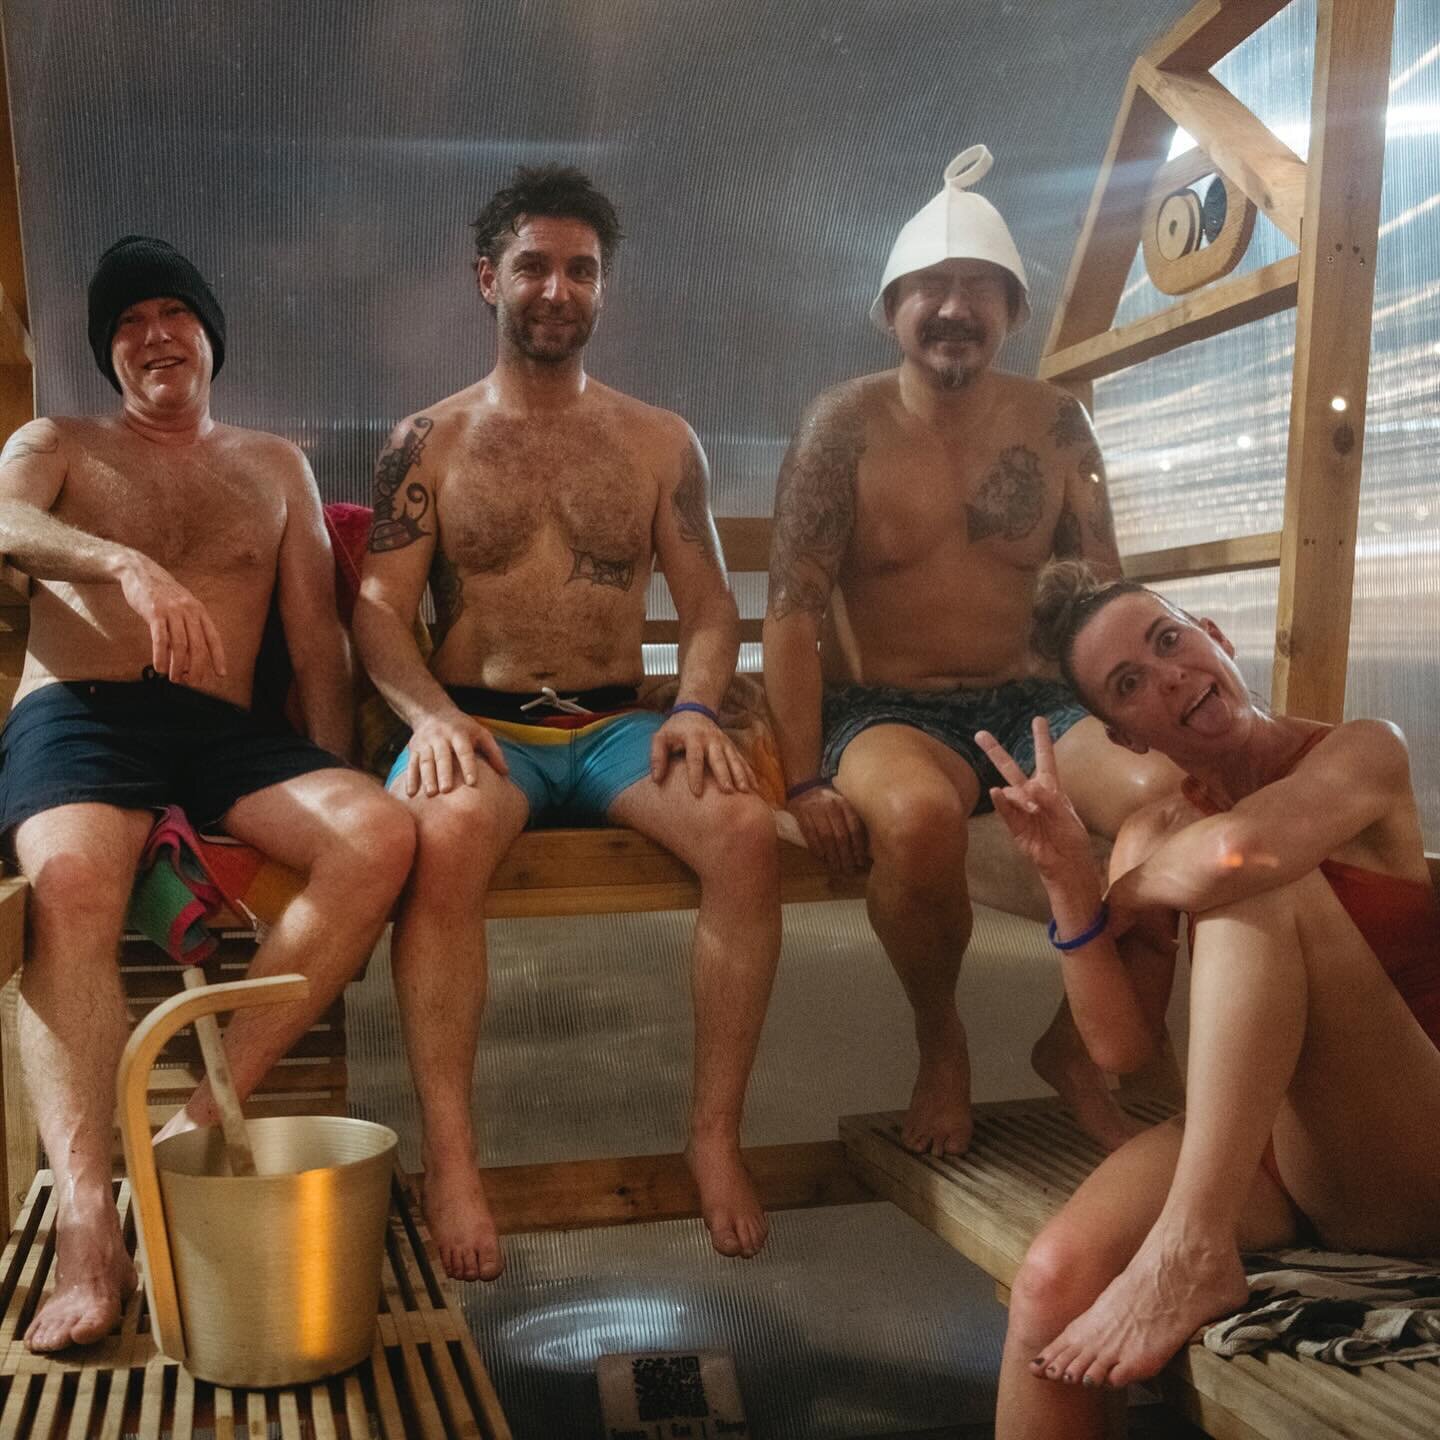 Only three days left to experience The Great Northern Sauna Village! It&rsquo;s going to be a beautiful weekend to sweat it all out and rejuvenate with thermic bathing traditions, an incredible community, and delicious fare just steps away at Malcolm